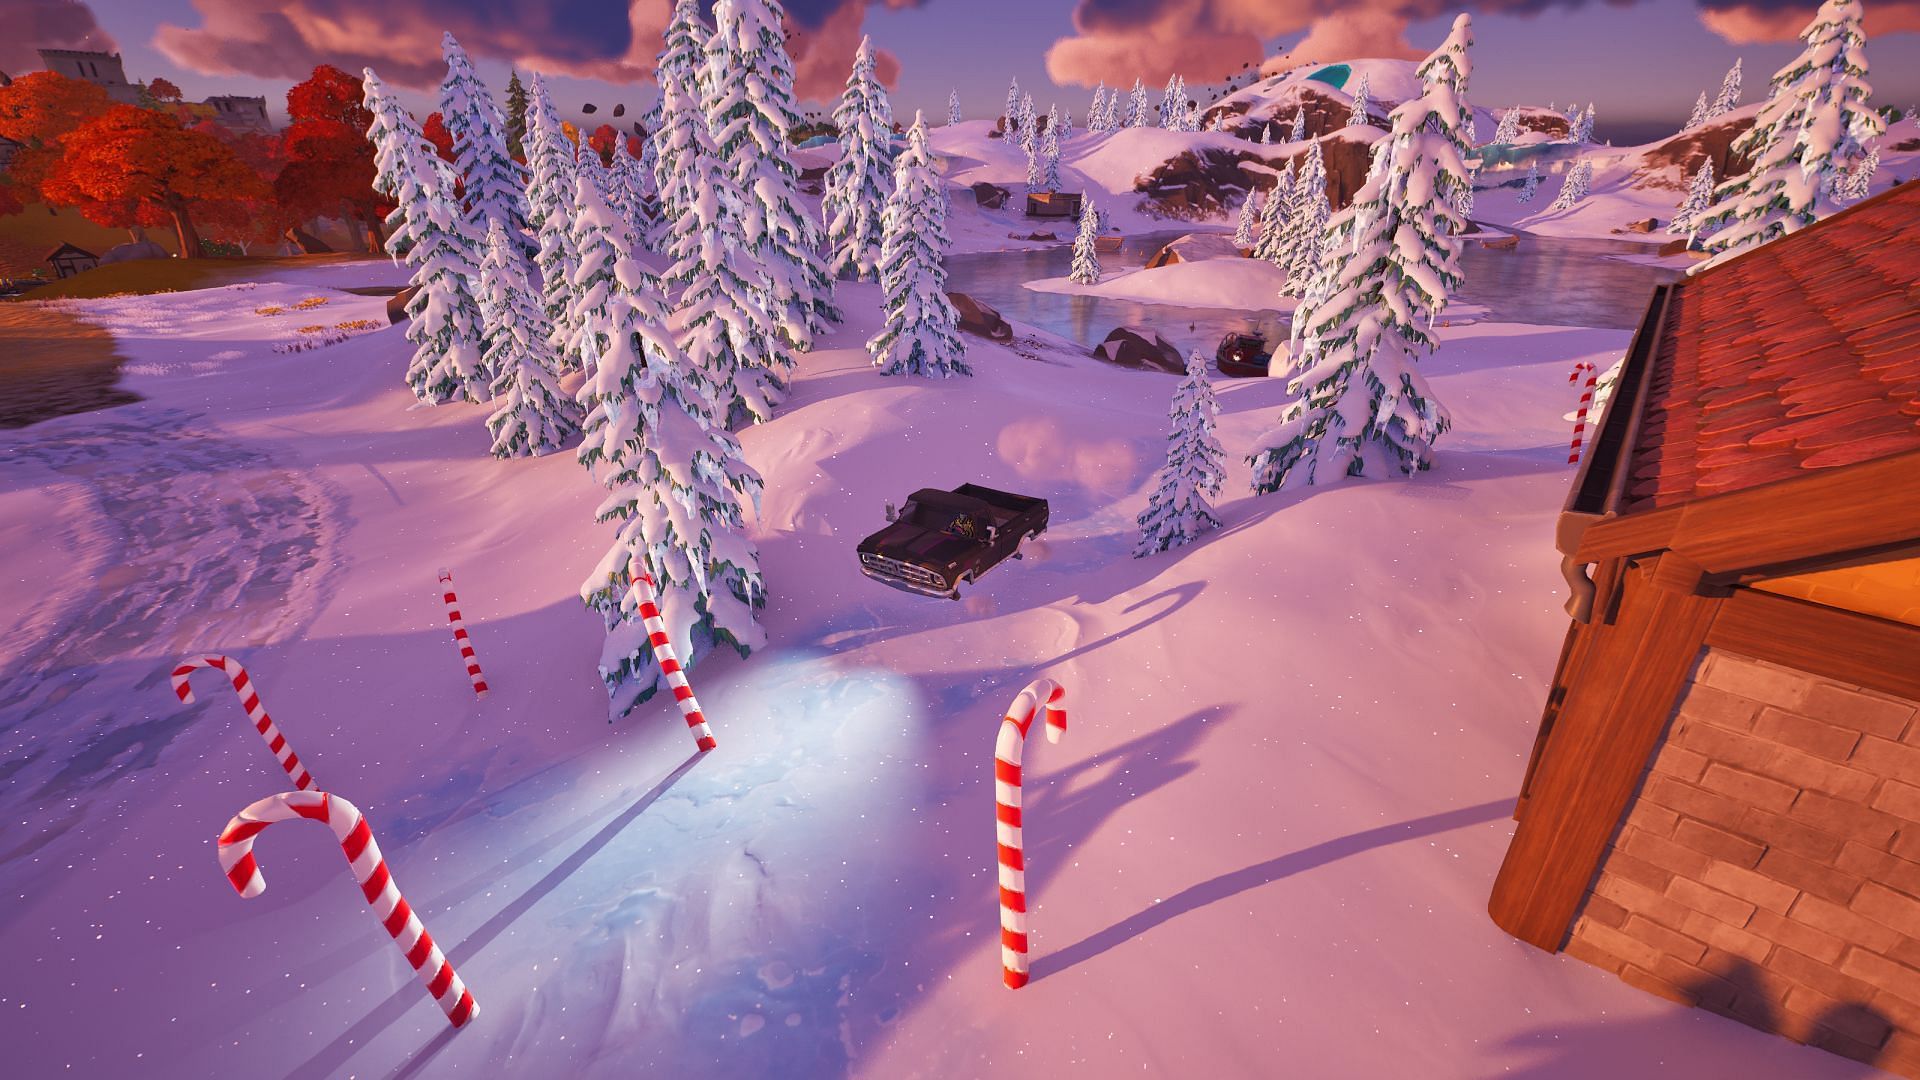 Crackshot&#039;s Cabin can be found next to Icy Islets (Image via Epic Games/Fortnite)